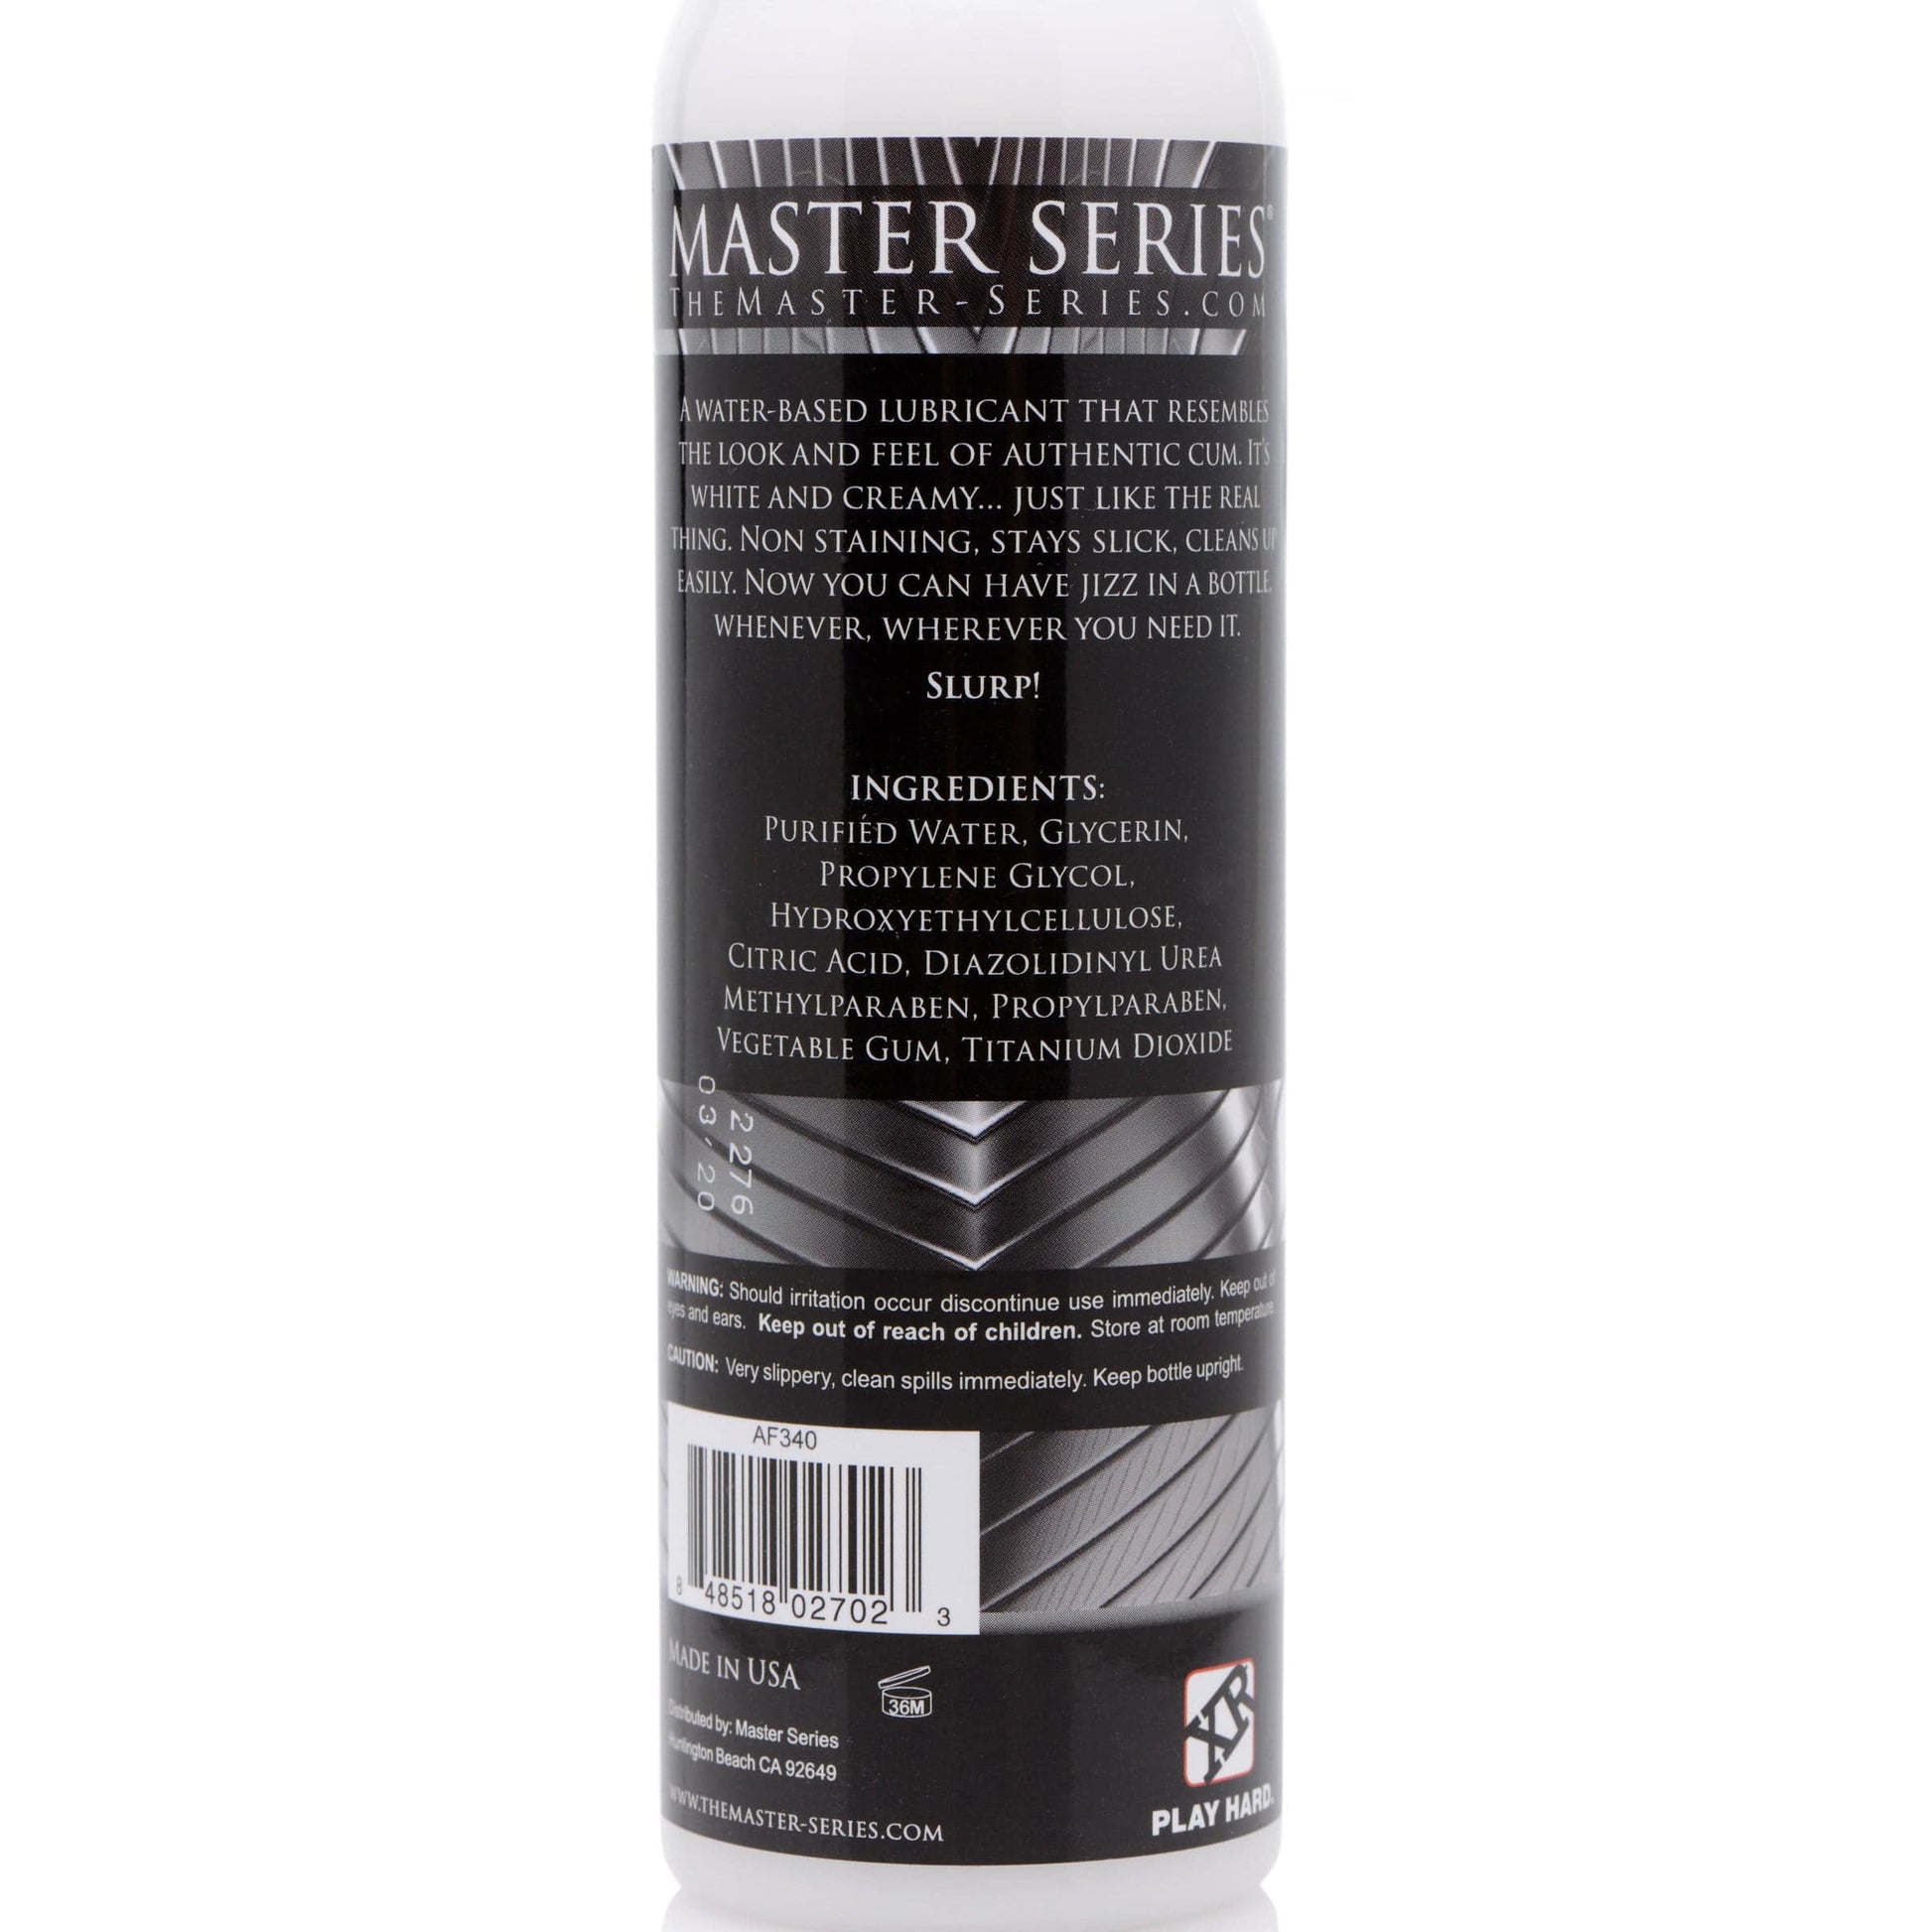 Master Series Water Based Lubricant Master Series Jizz Unscented Water-Based Lube at the Haus of Shag